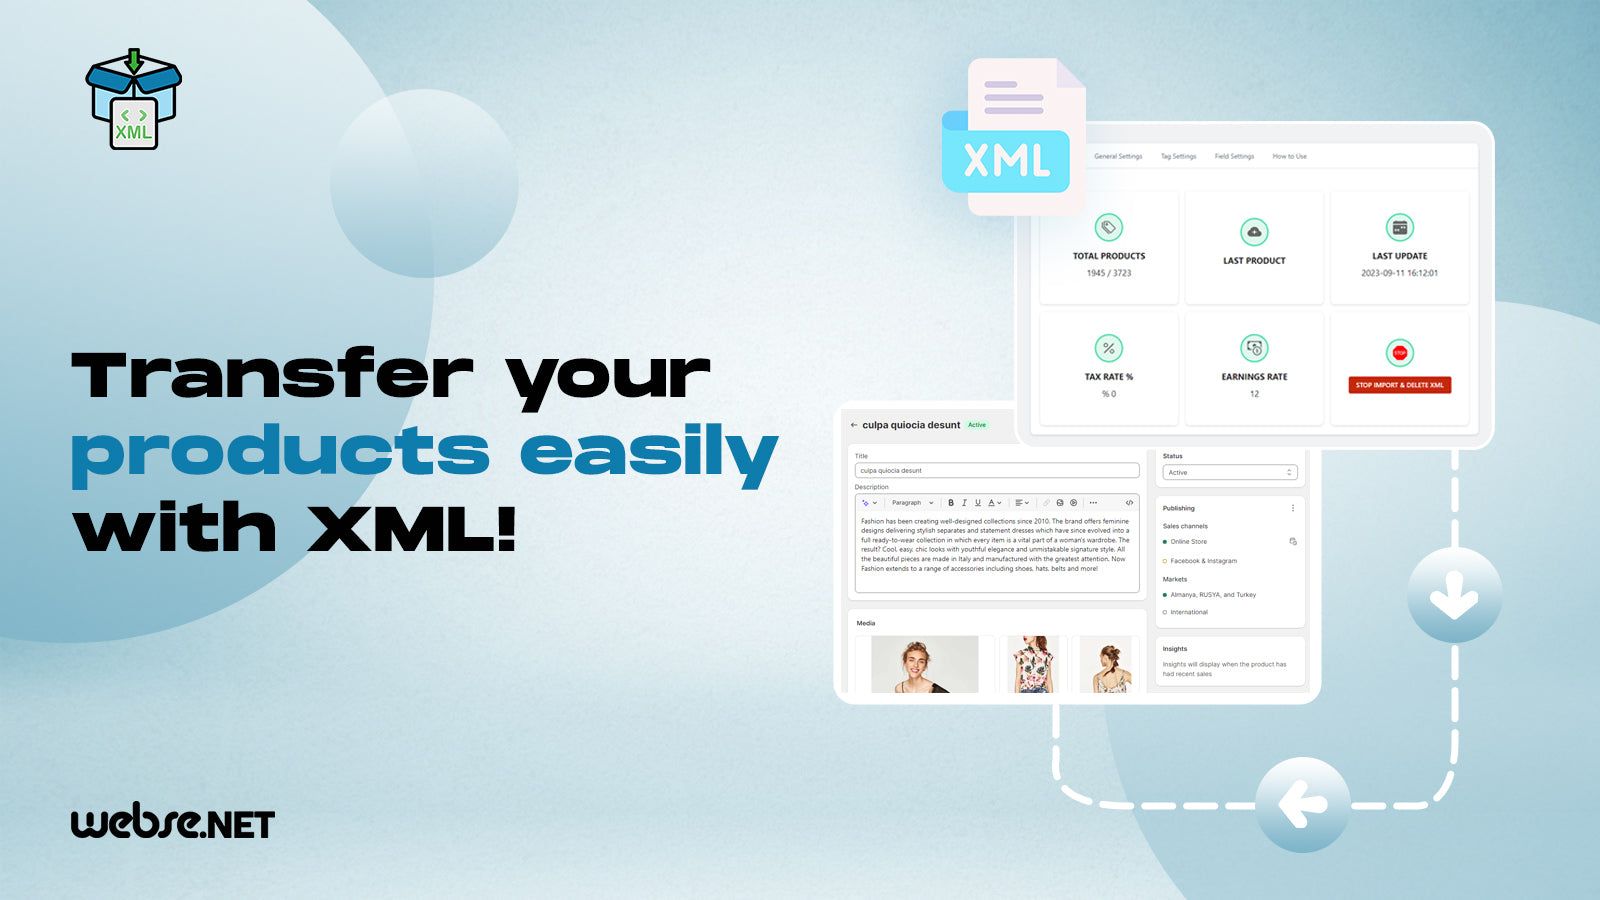 Transfer your products easily with XML!